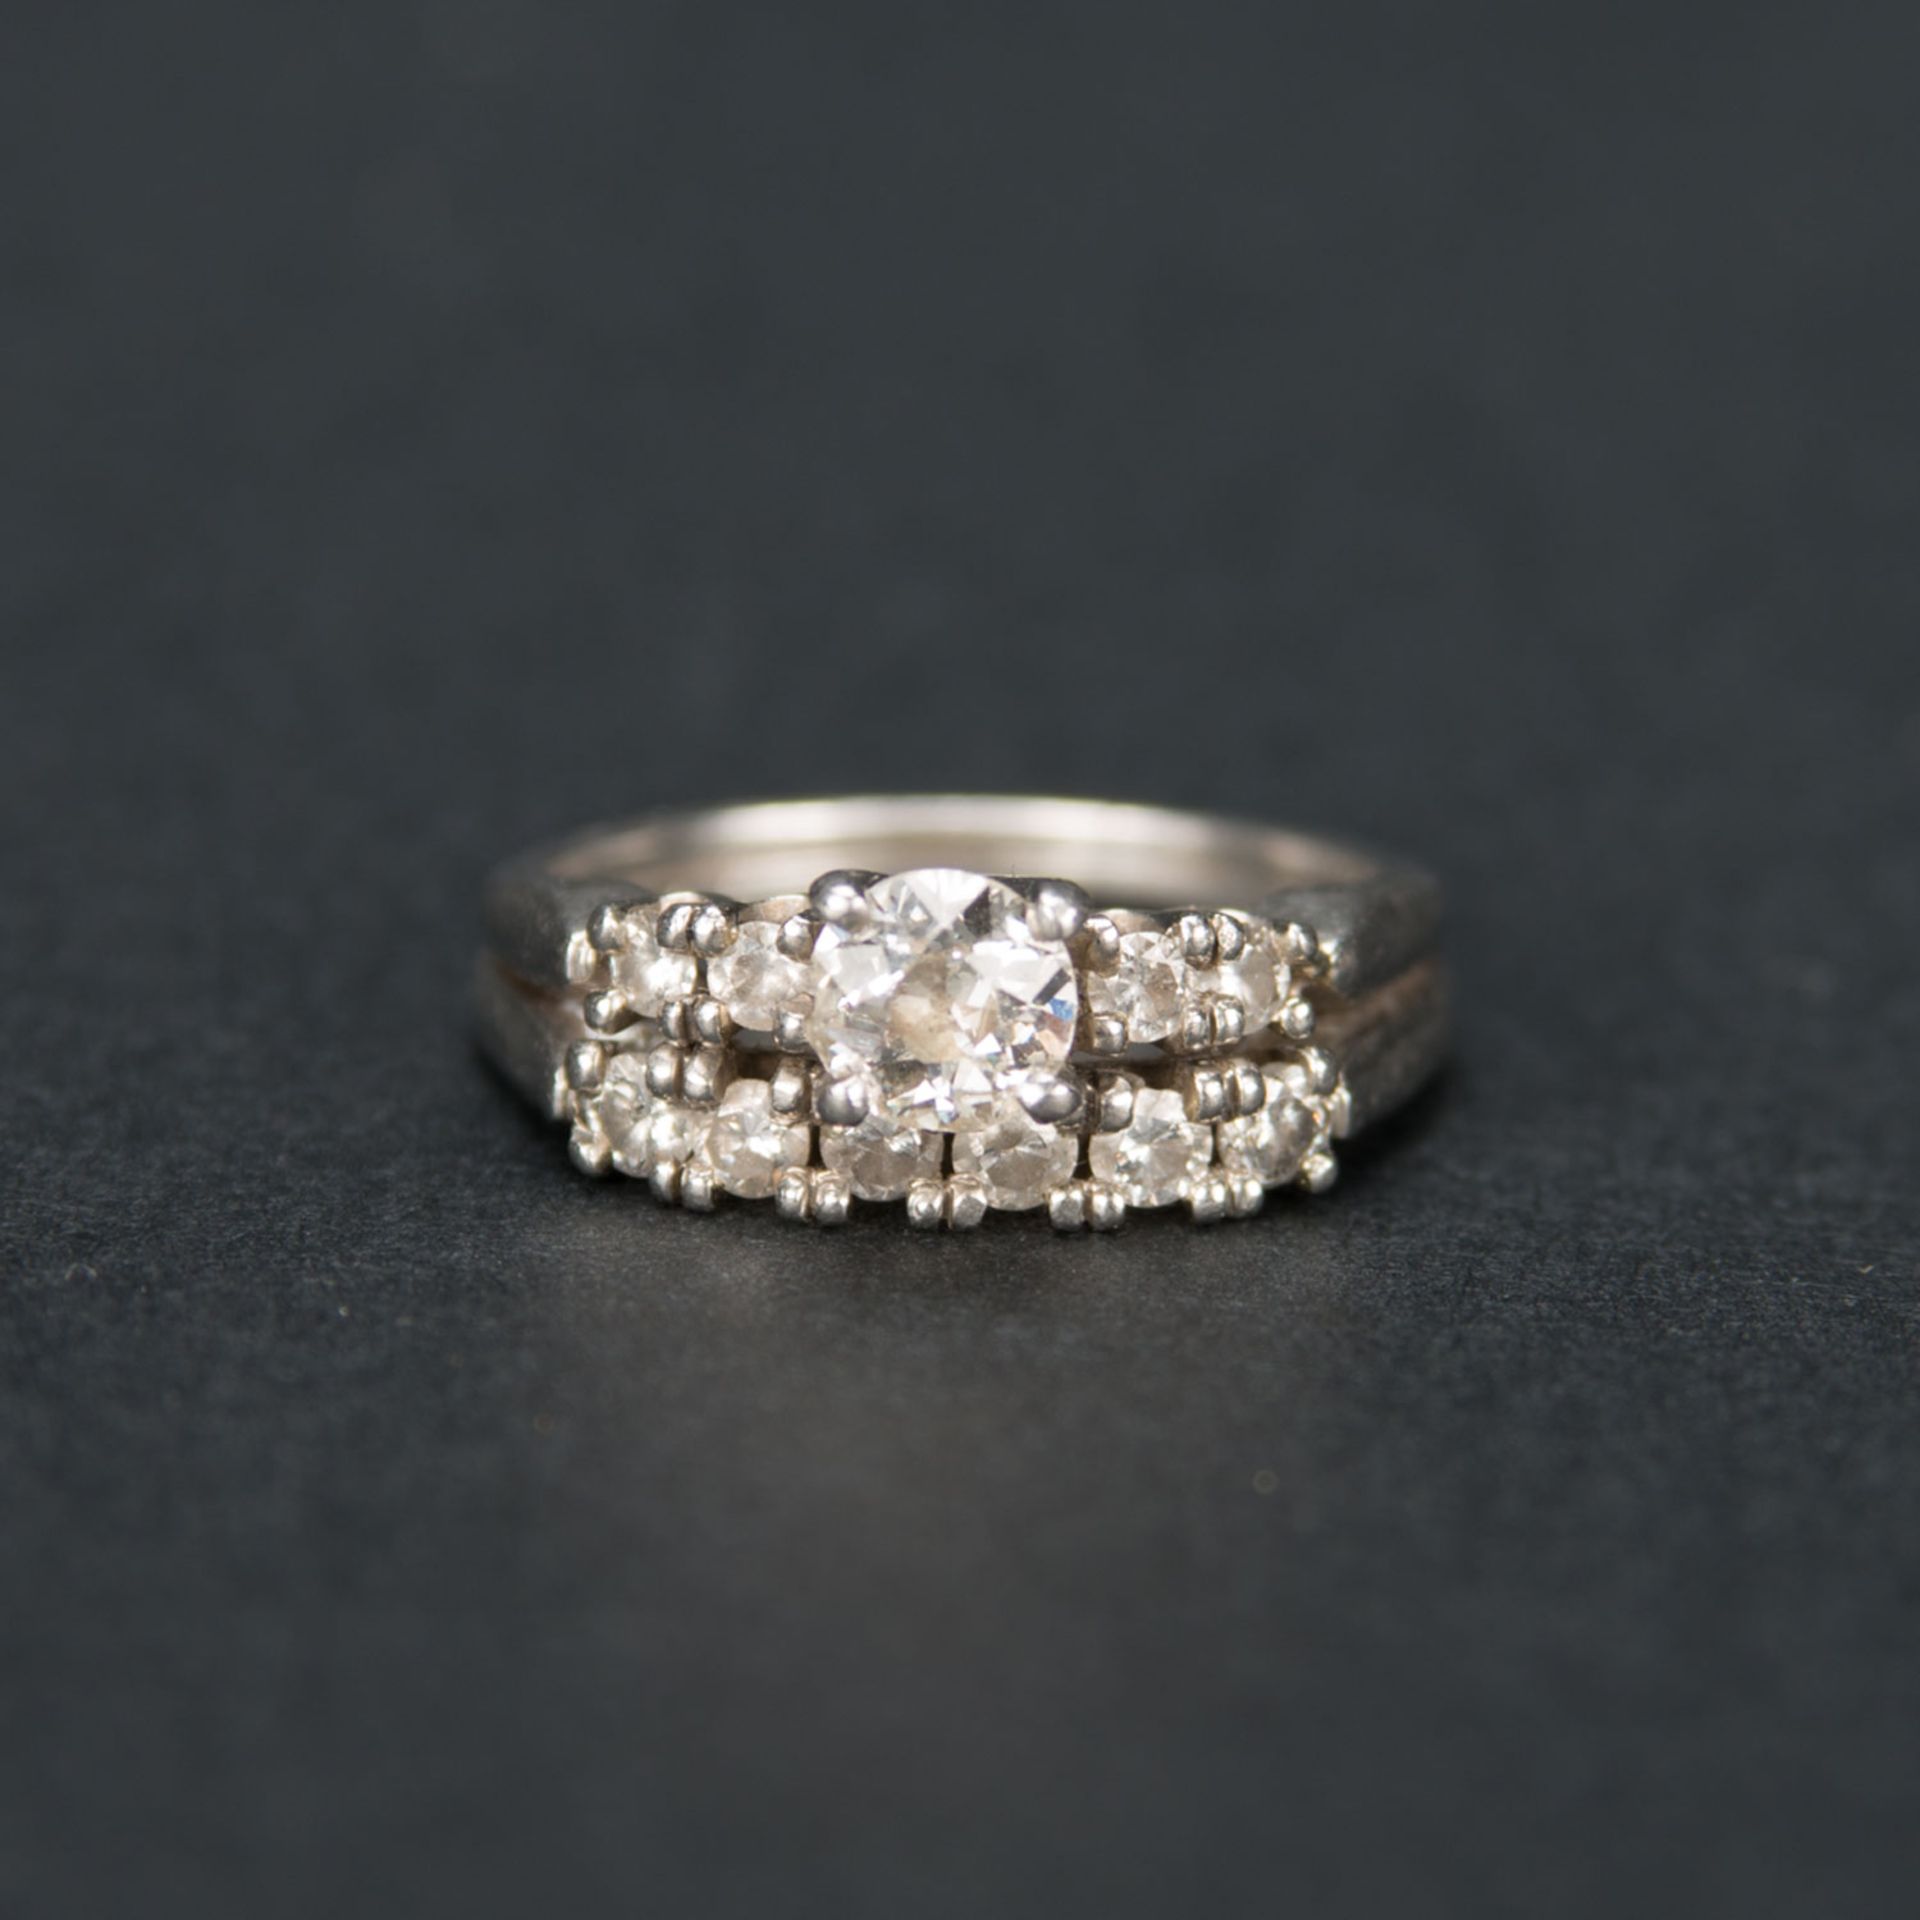 Ladys Ring with Diamonds - Image 3 of 3